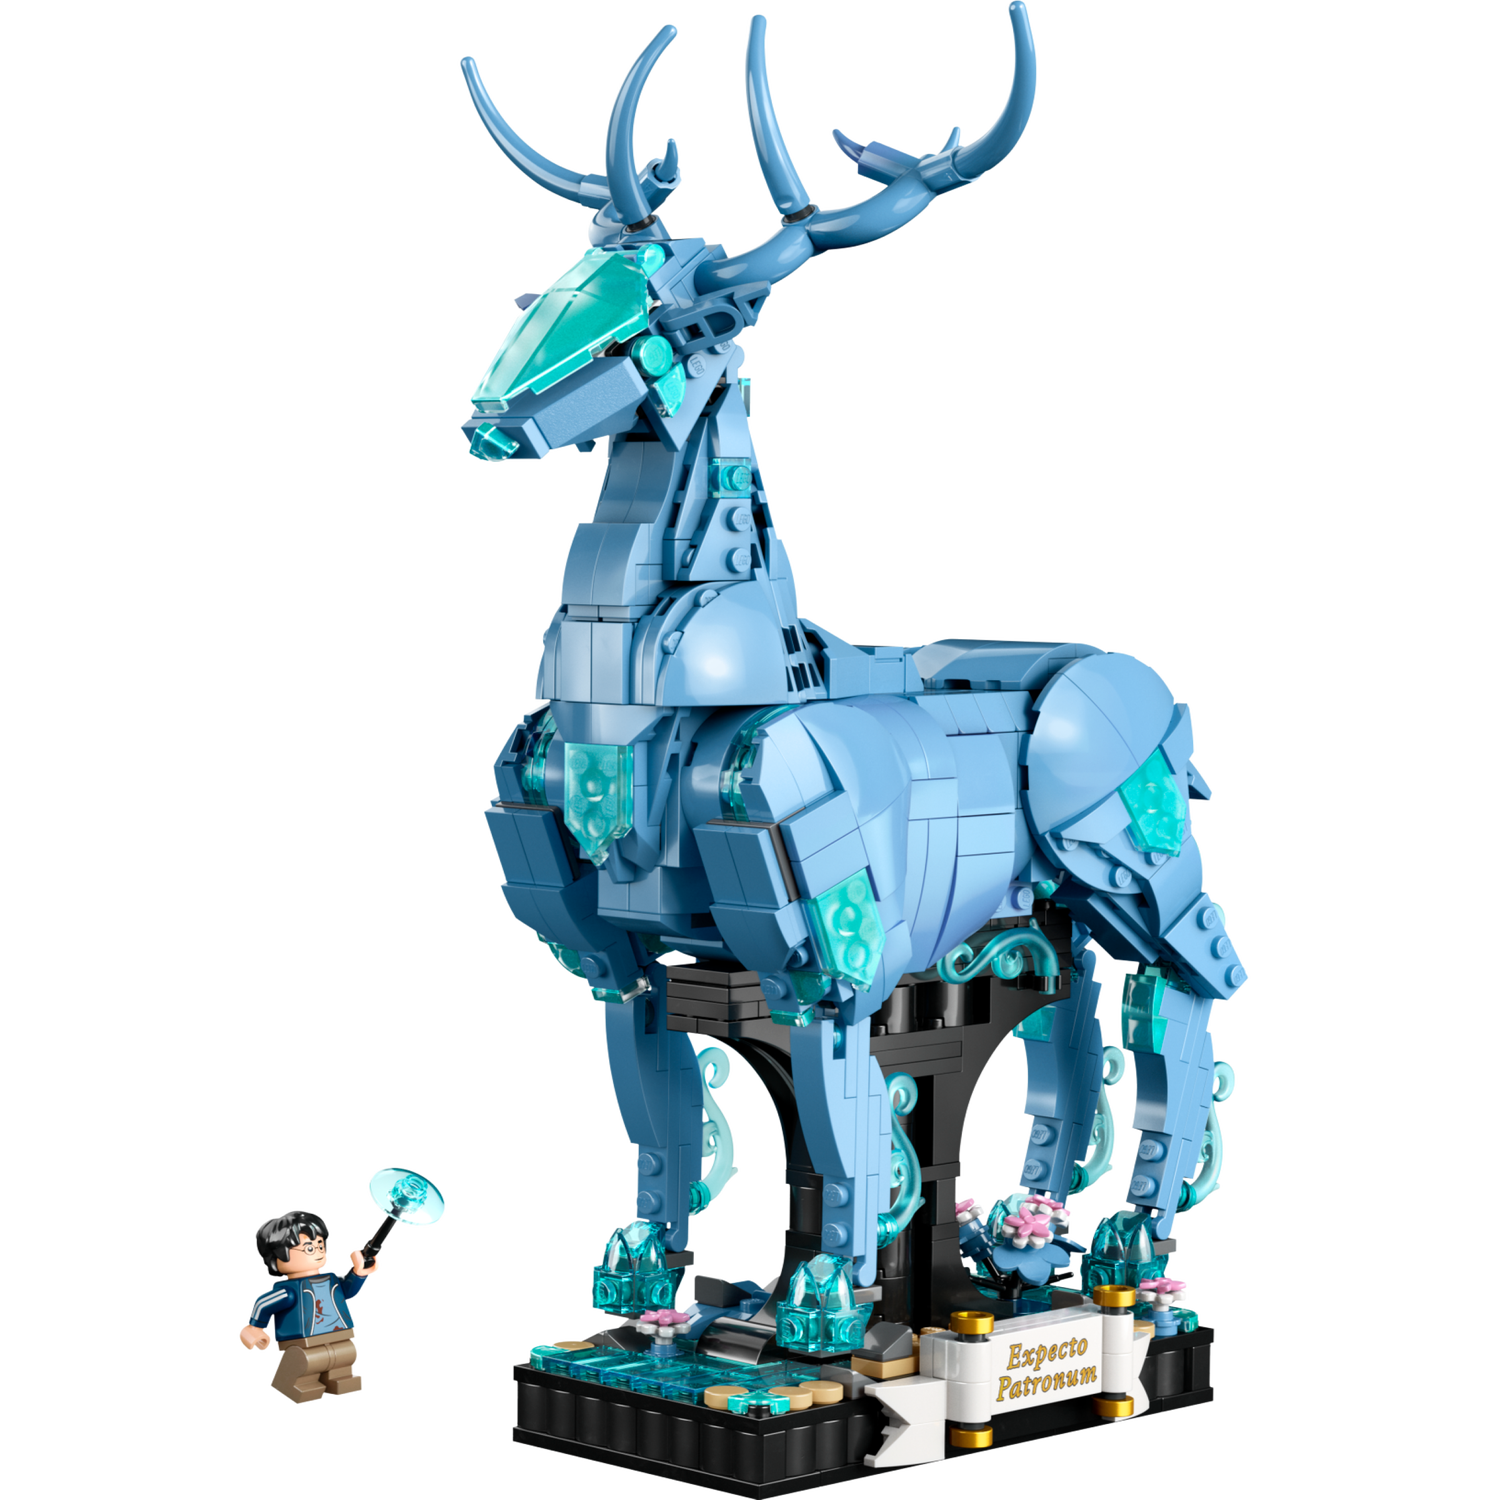 Expecto Patronum 76414 | Harry Potter™ | Buy online at the - LEGO